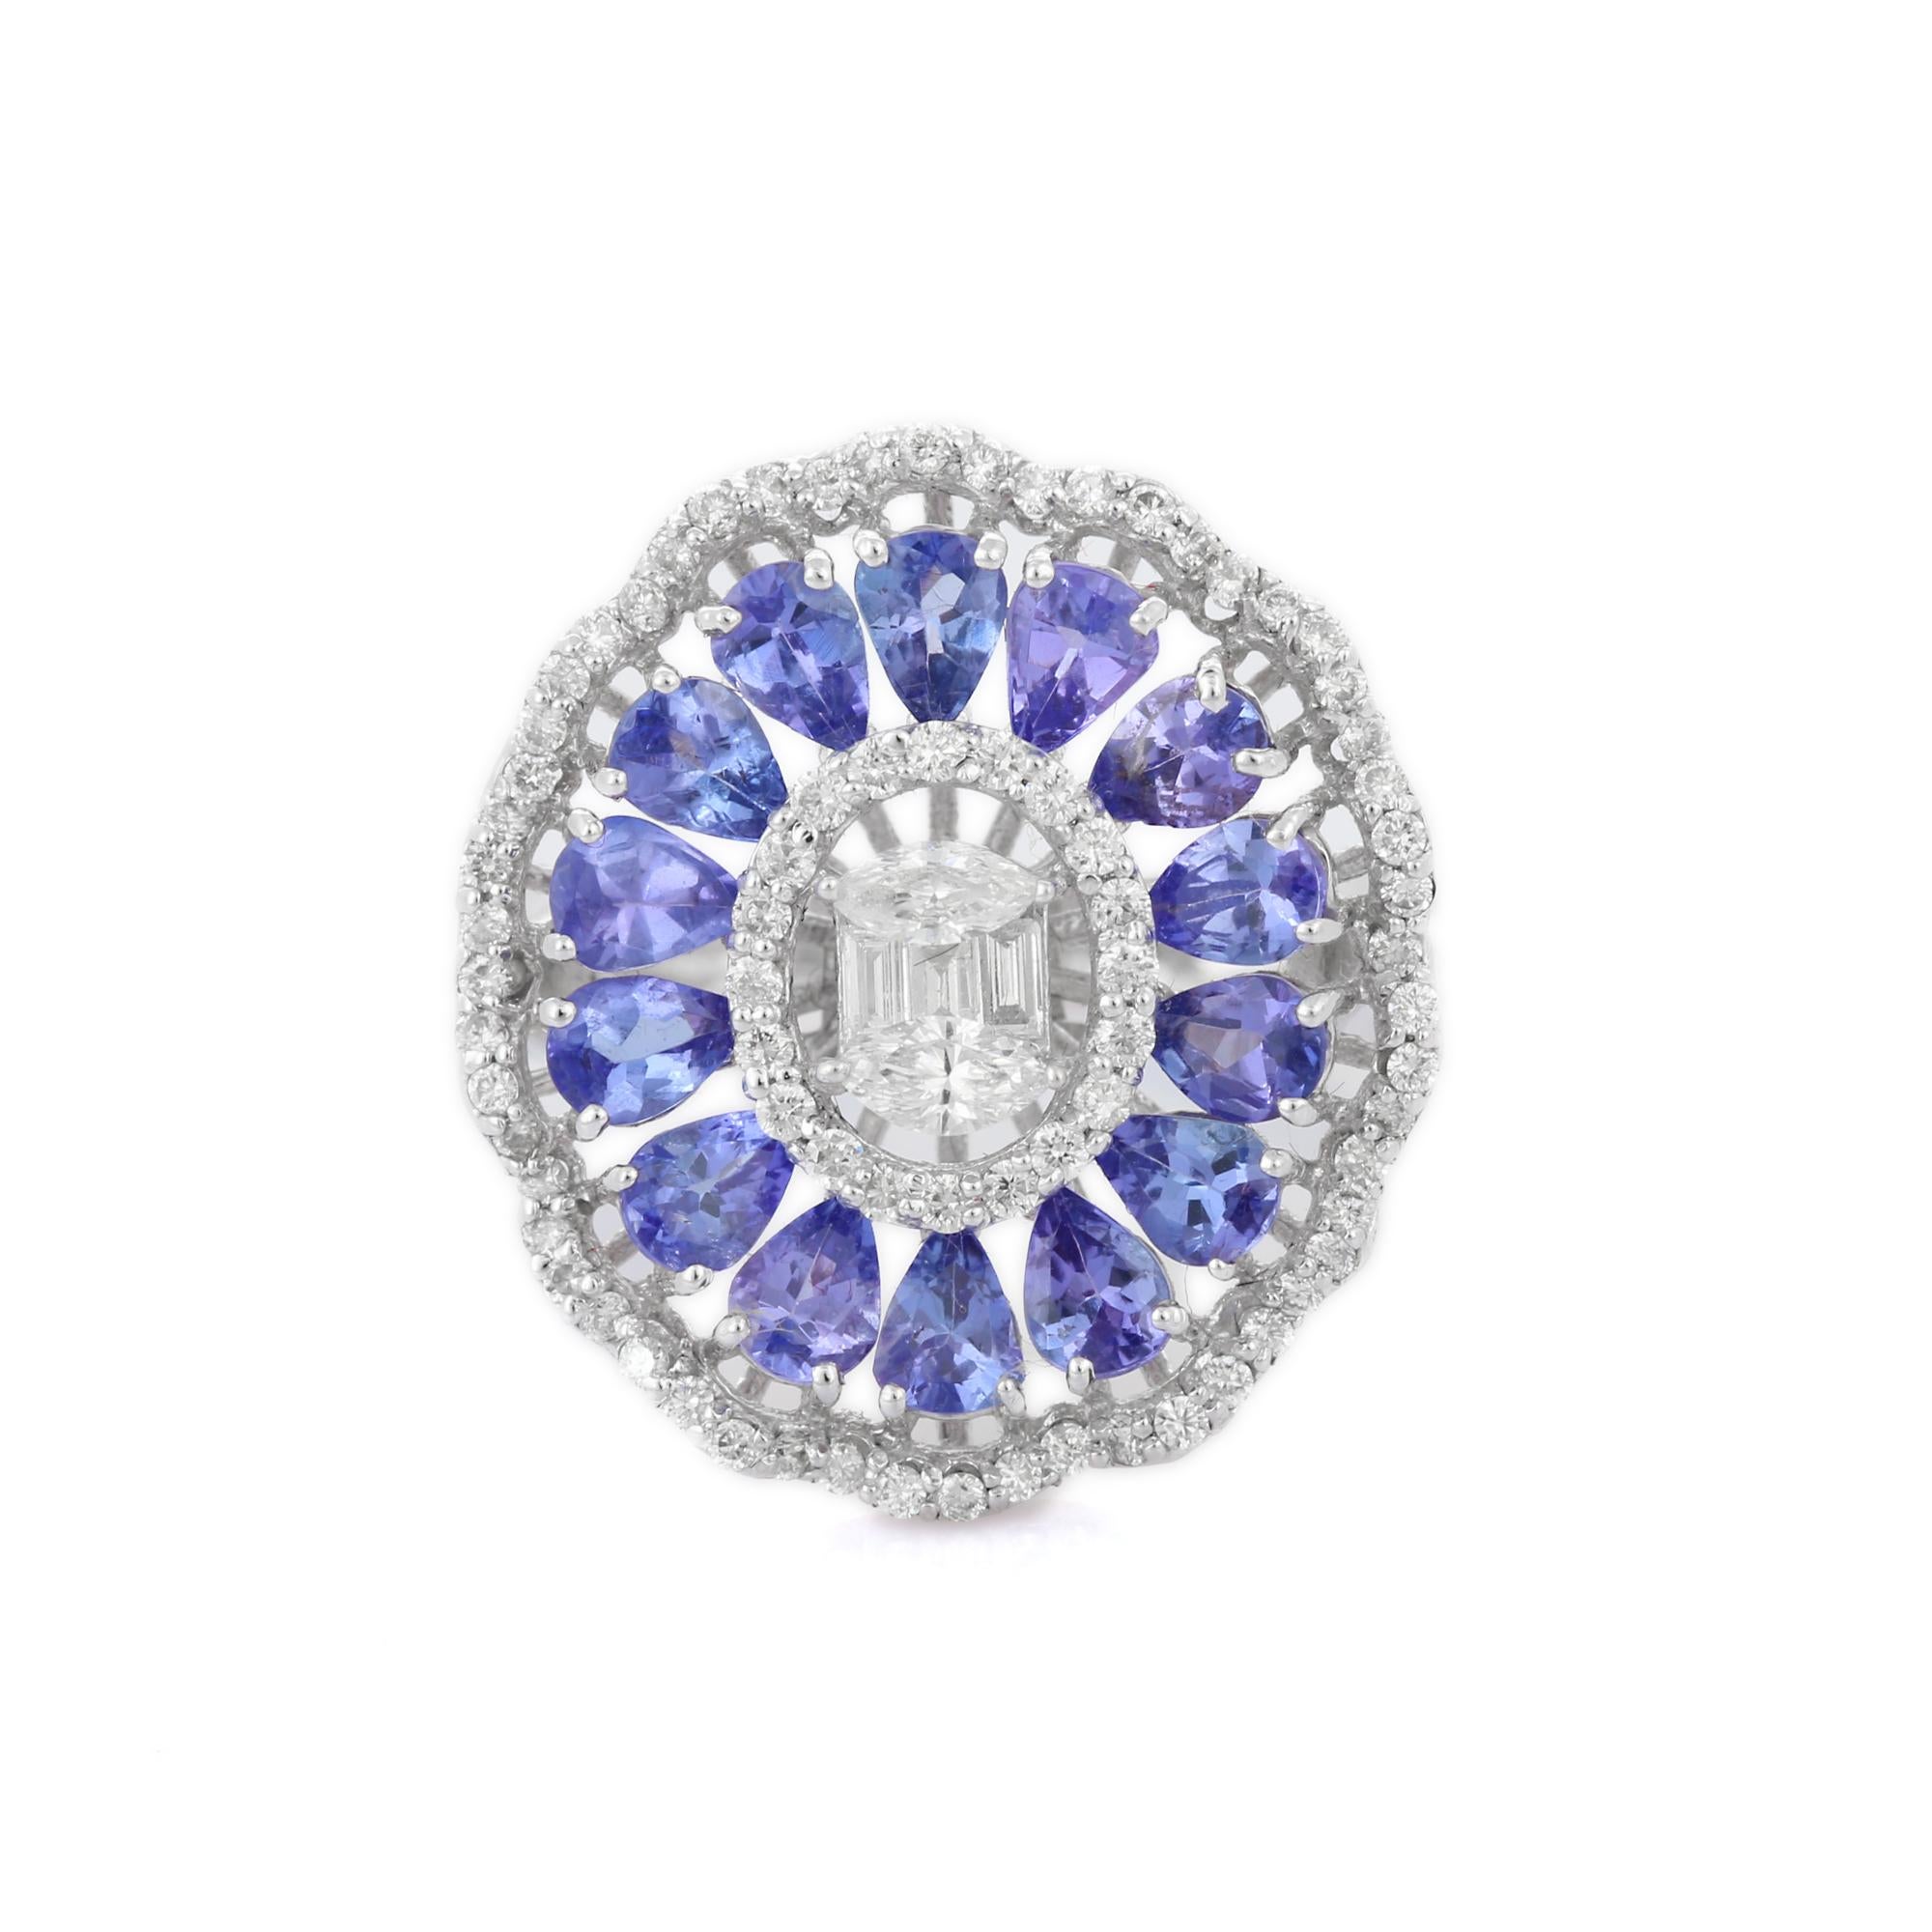 For Sale:  18K White Gold 2.26 ct Blue Sapphire Floral Cocktail Wedding Ring with Diamonds 4